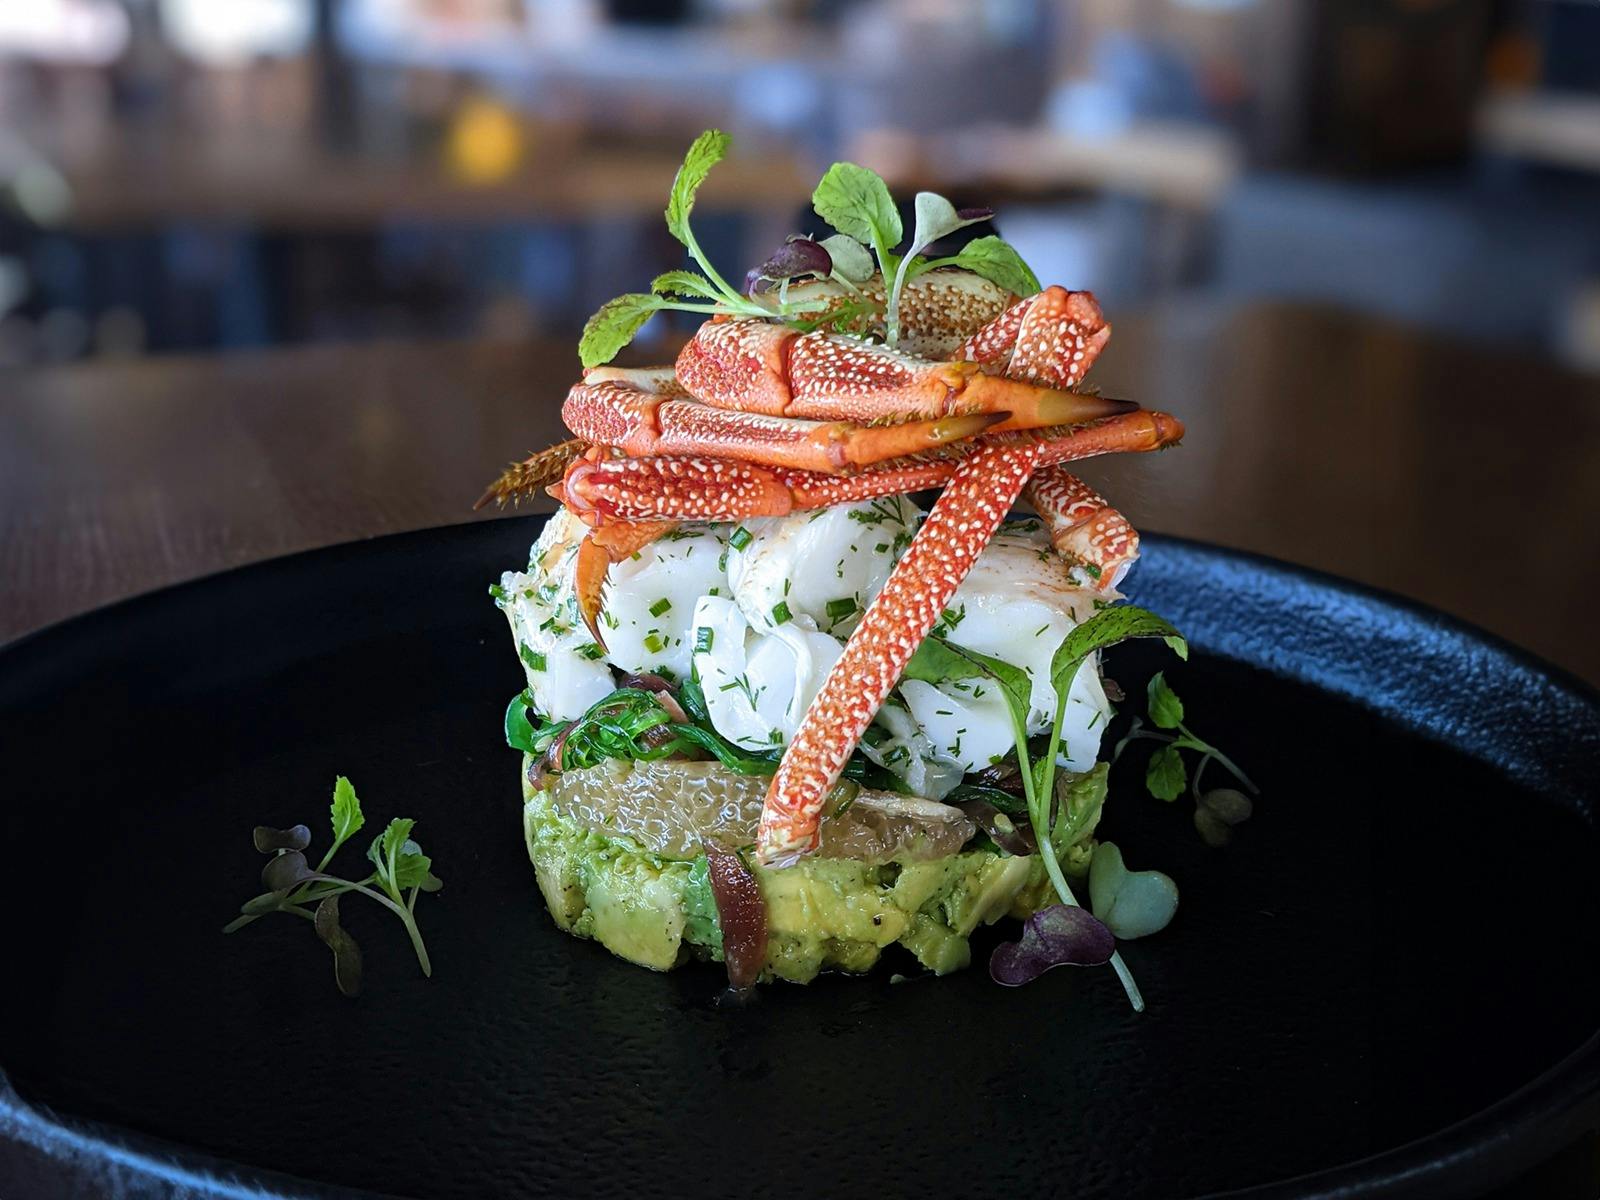 A dish with Rock Lobster meat and legs, arrange on a grapefruit and avocado base